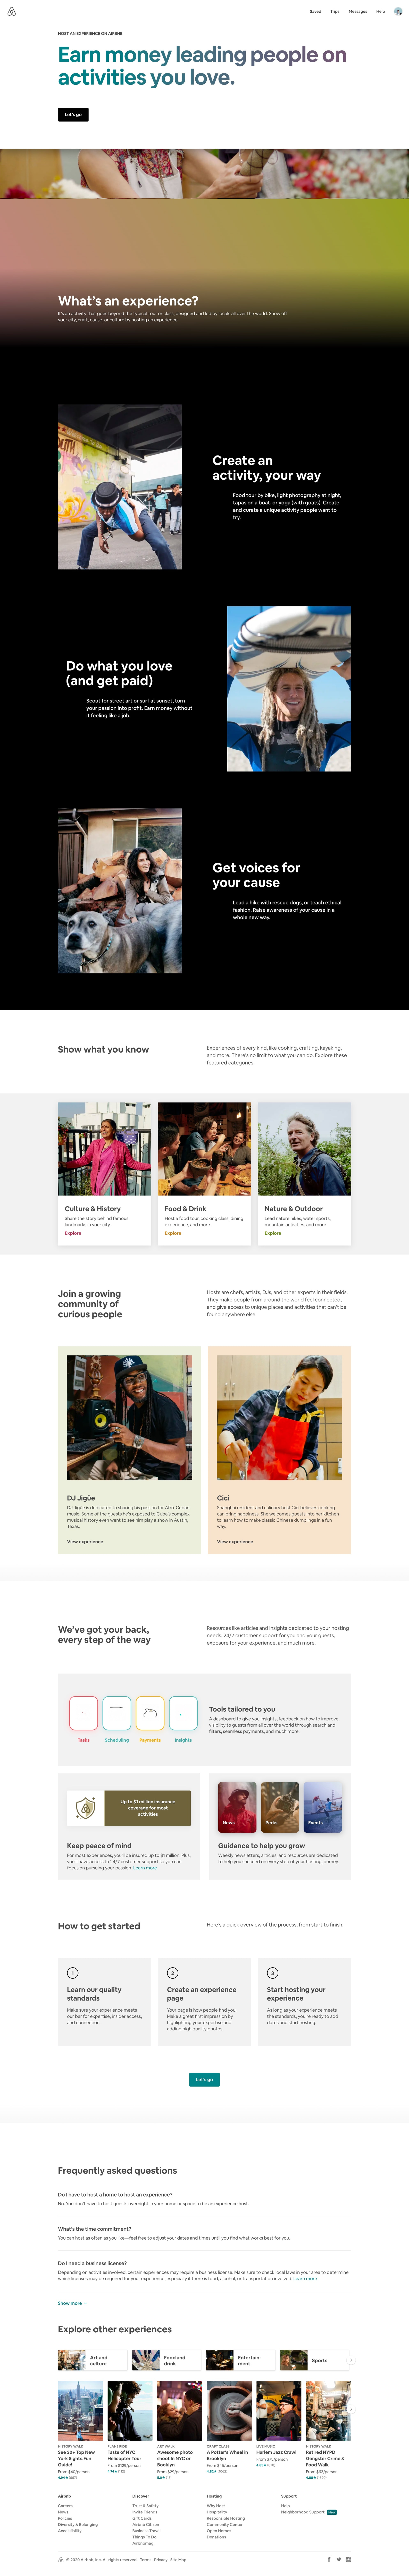 airbnb host experience page design